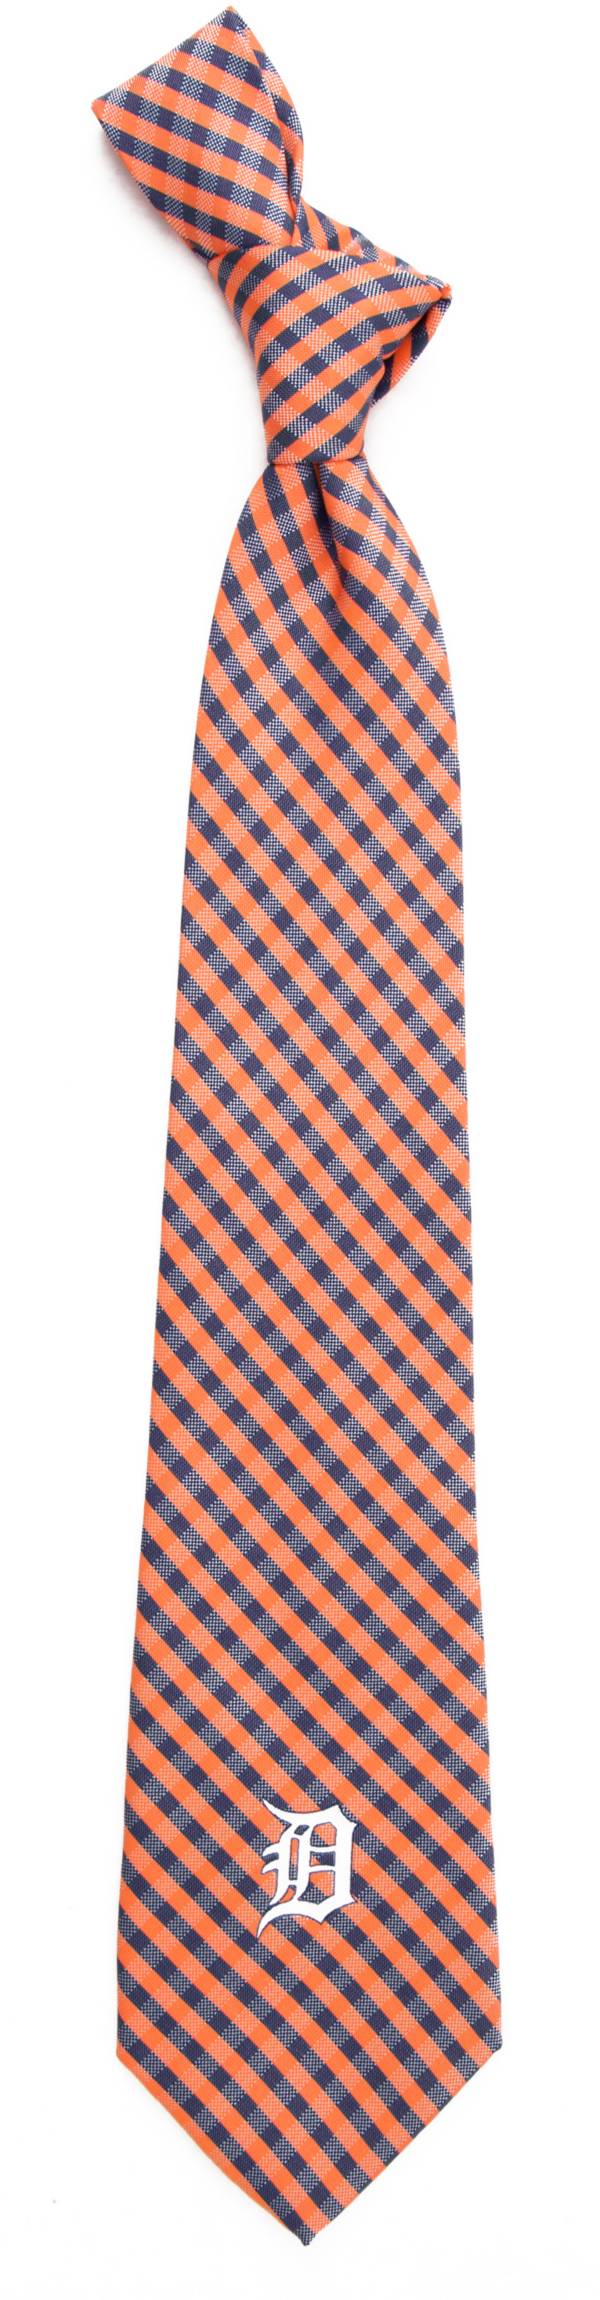 Eagles Wings Detroit Tigers Gingham Necktie product image